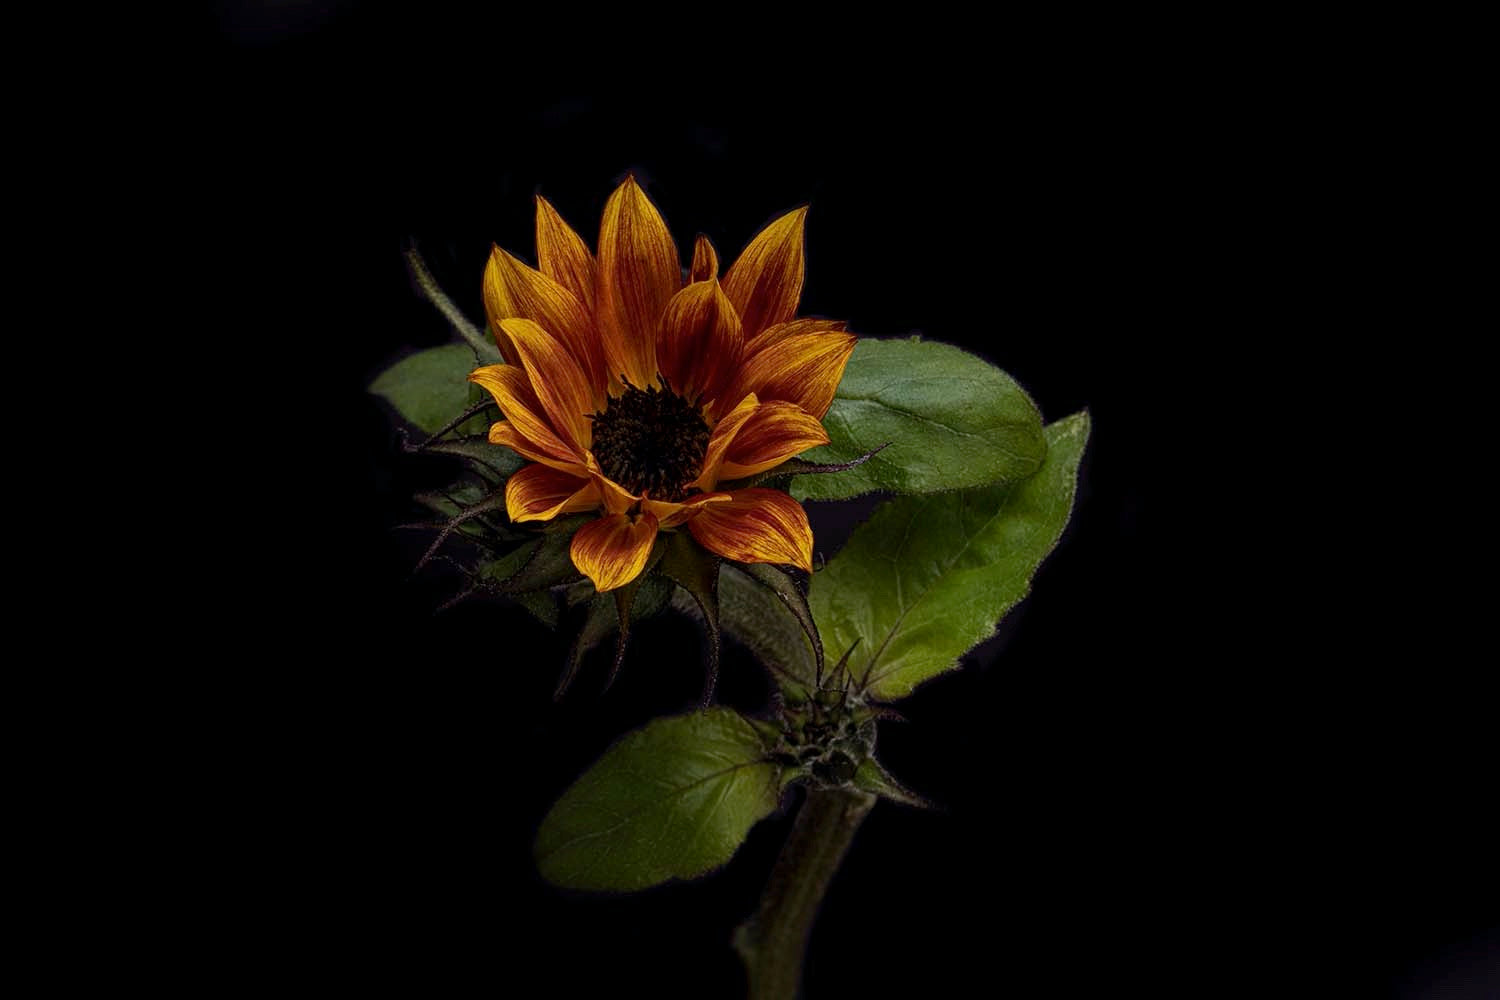 Bewitched Sunflower , Print by Photographer Tal Shpantzer